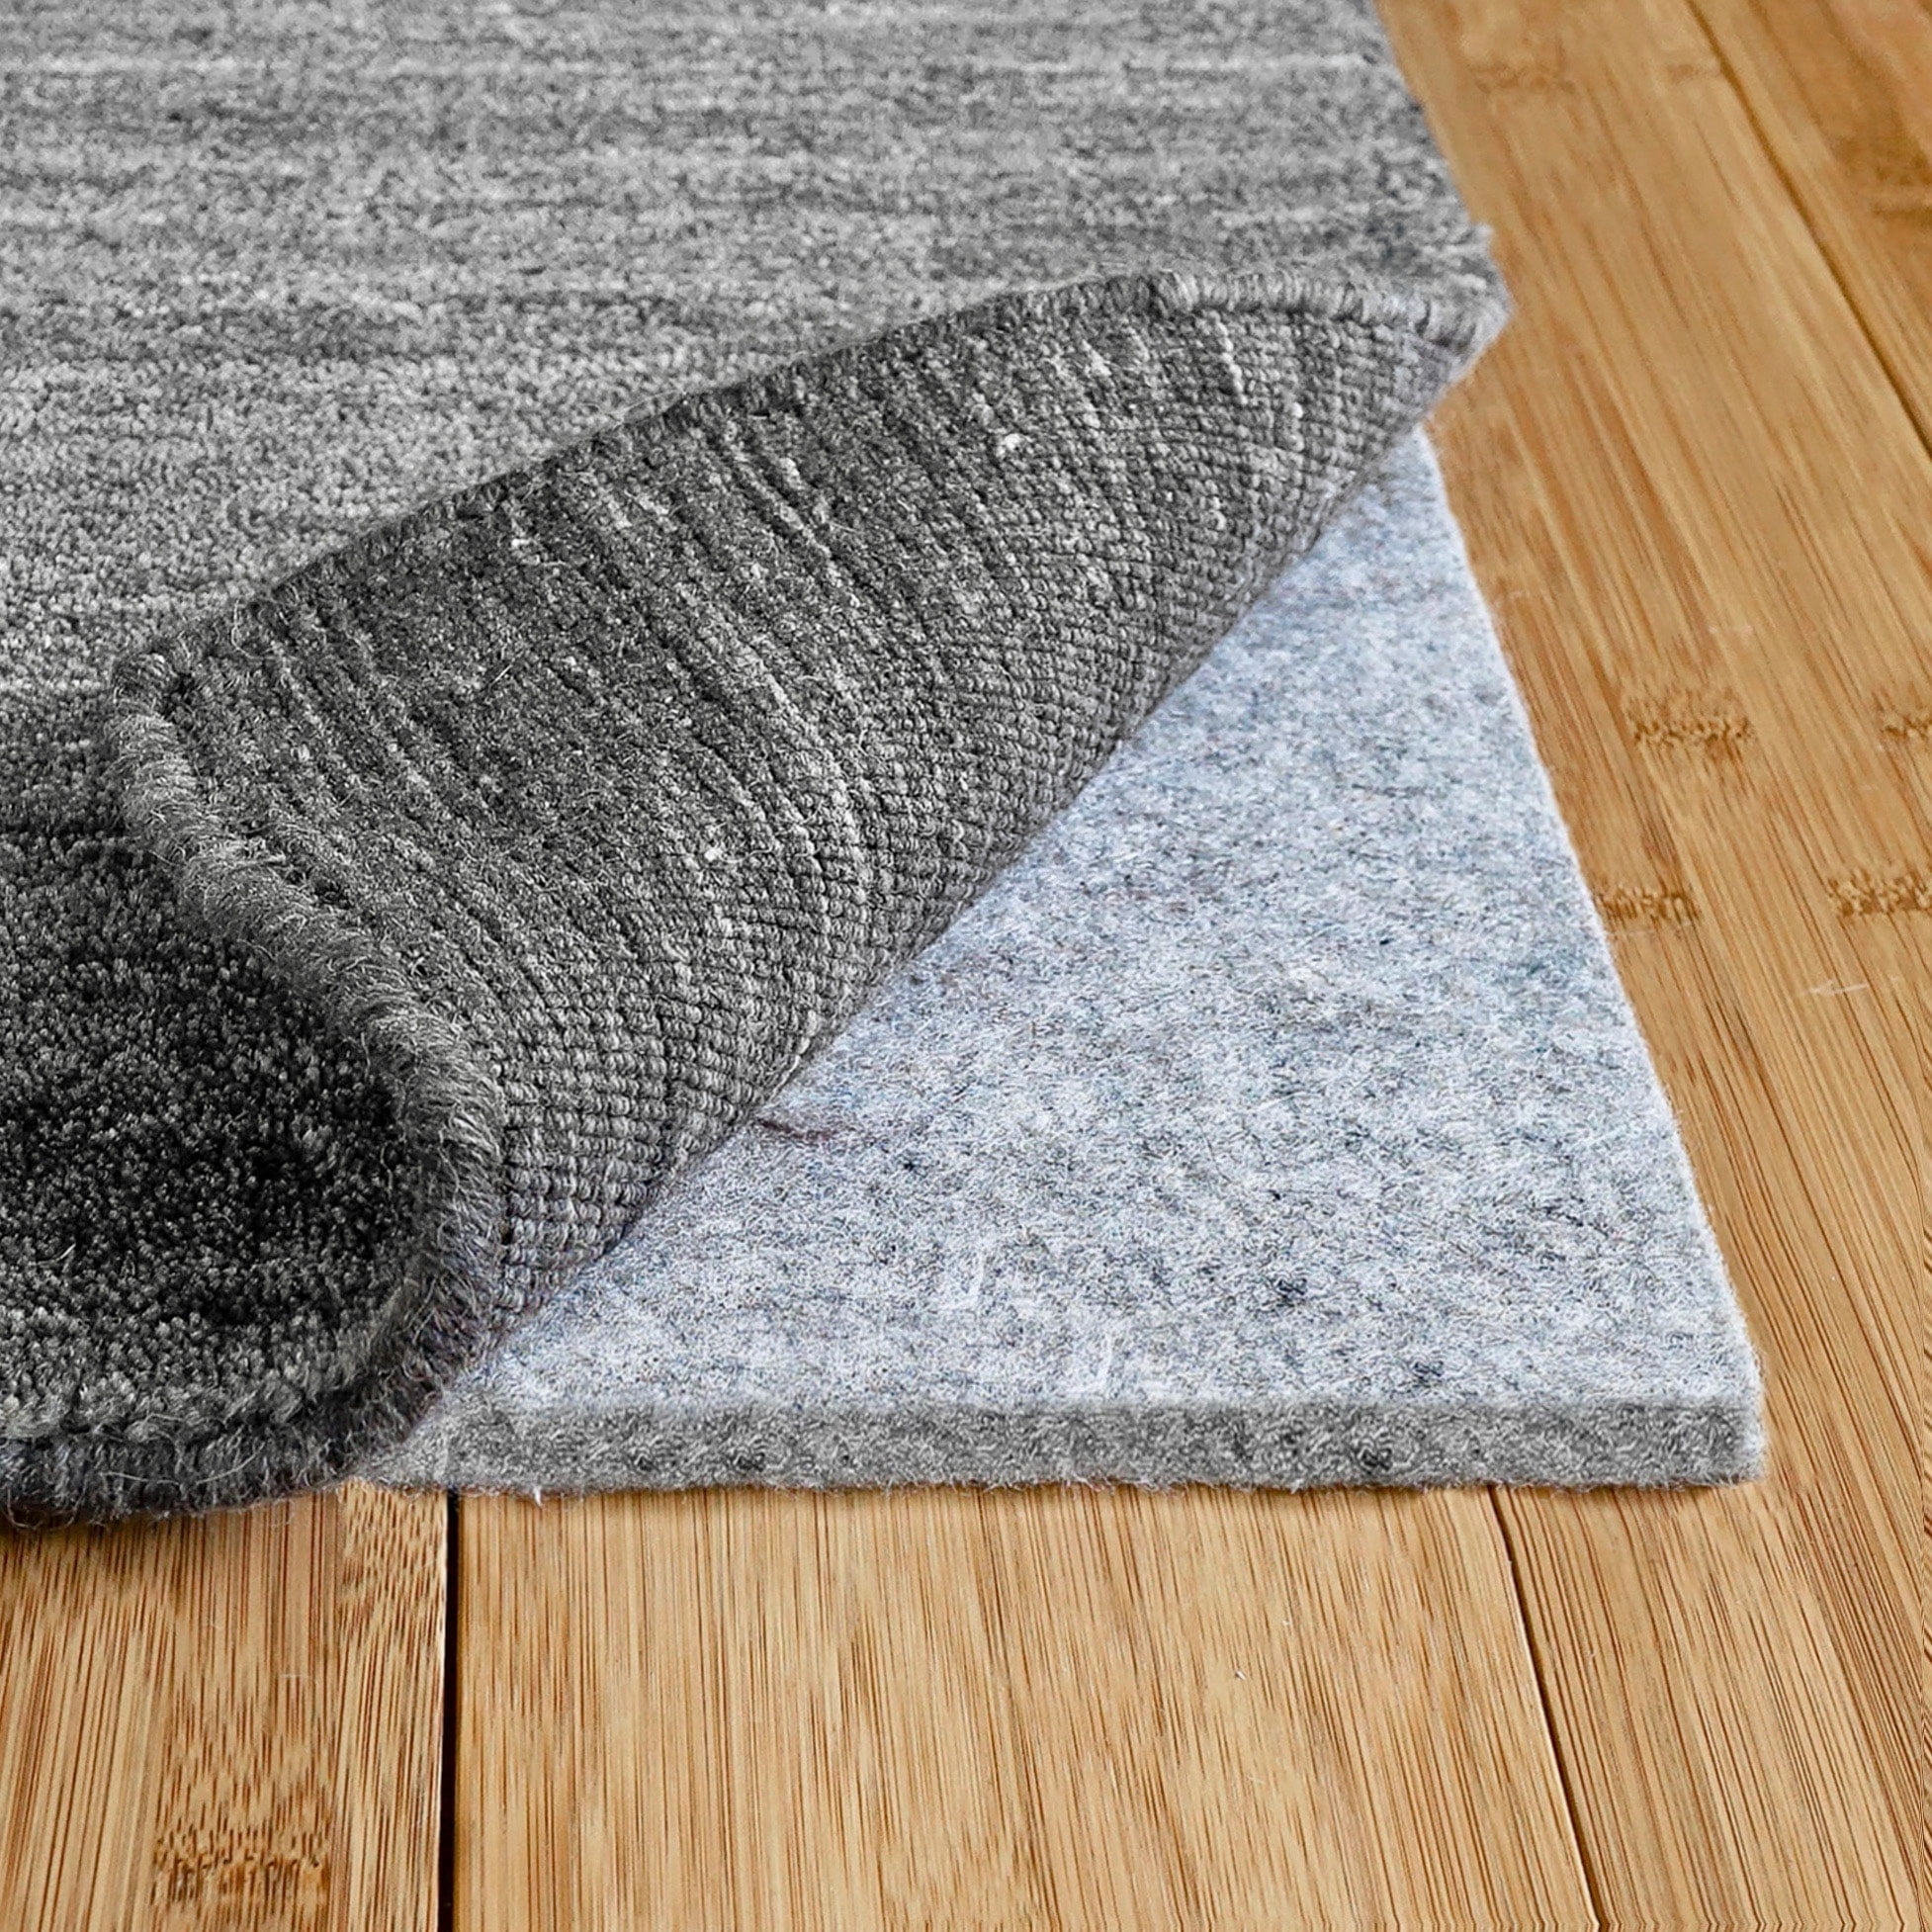 Protective Cushioning Rug Pad, Are Gel Pro Mats Safe For Hardwood Floors